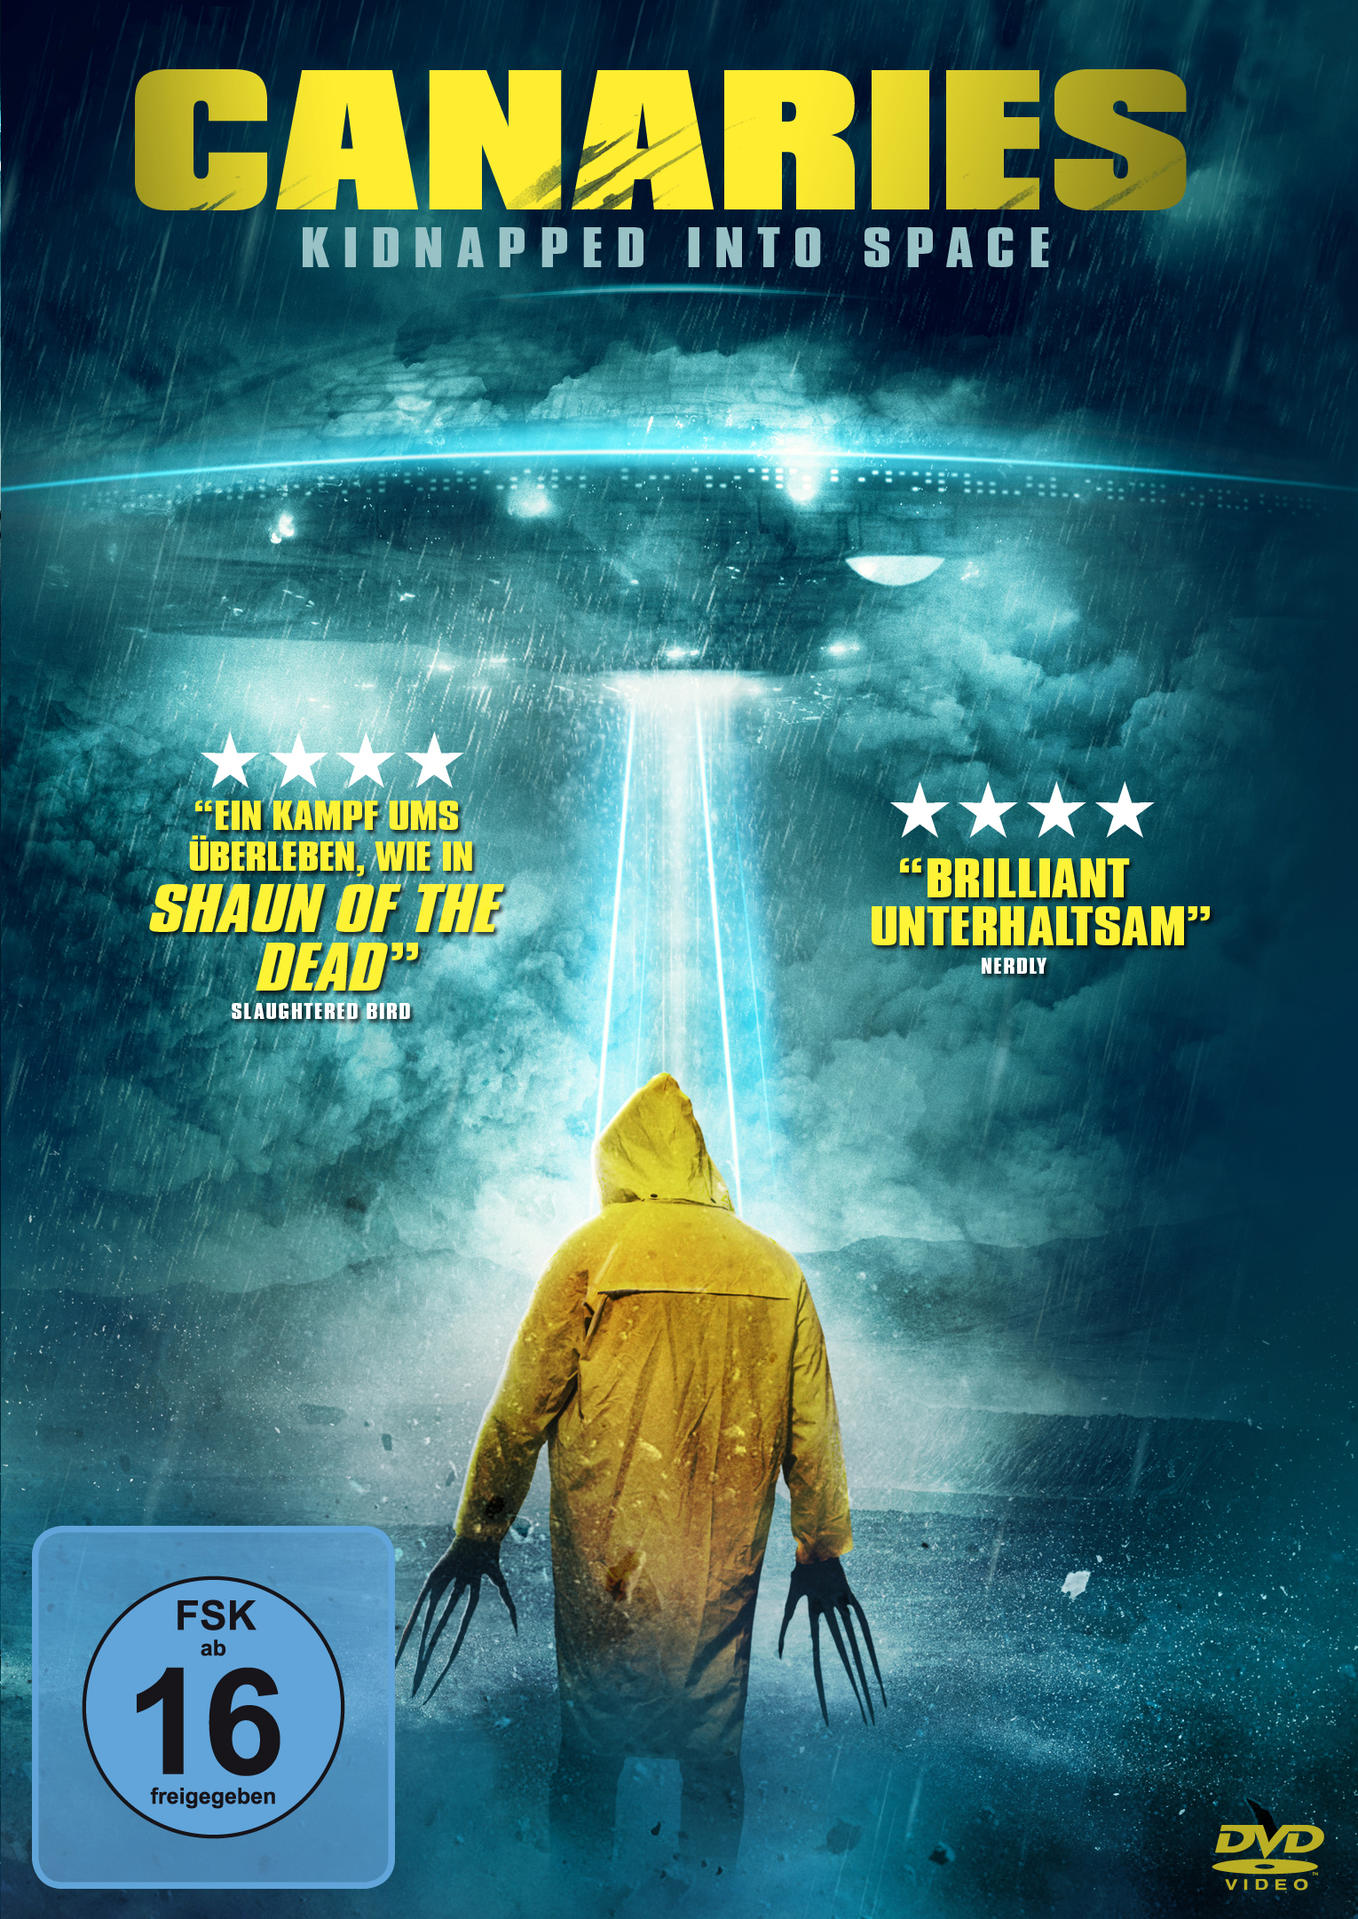 Canaries - Kidnapped into Space DVD